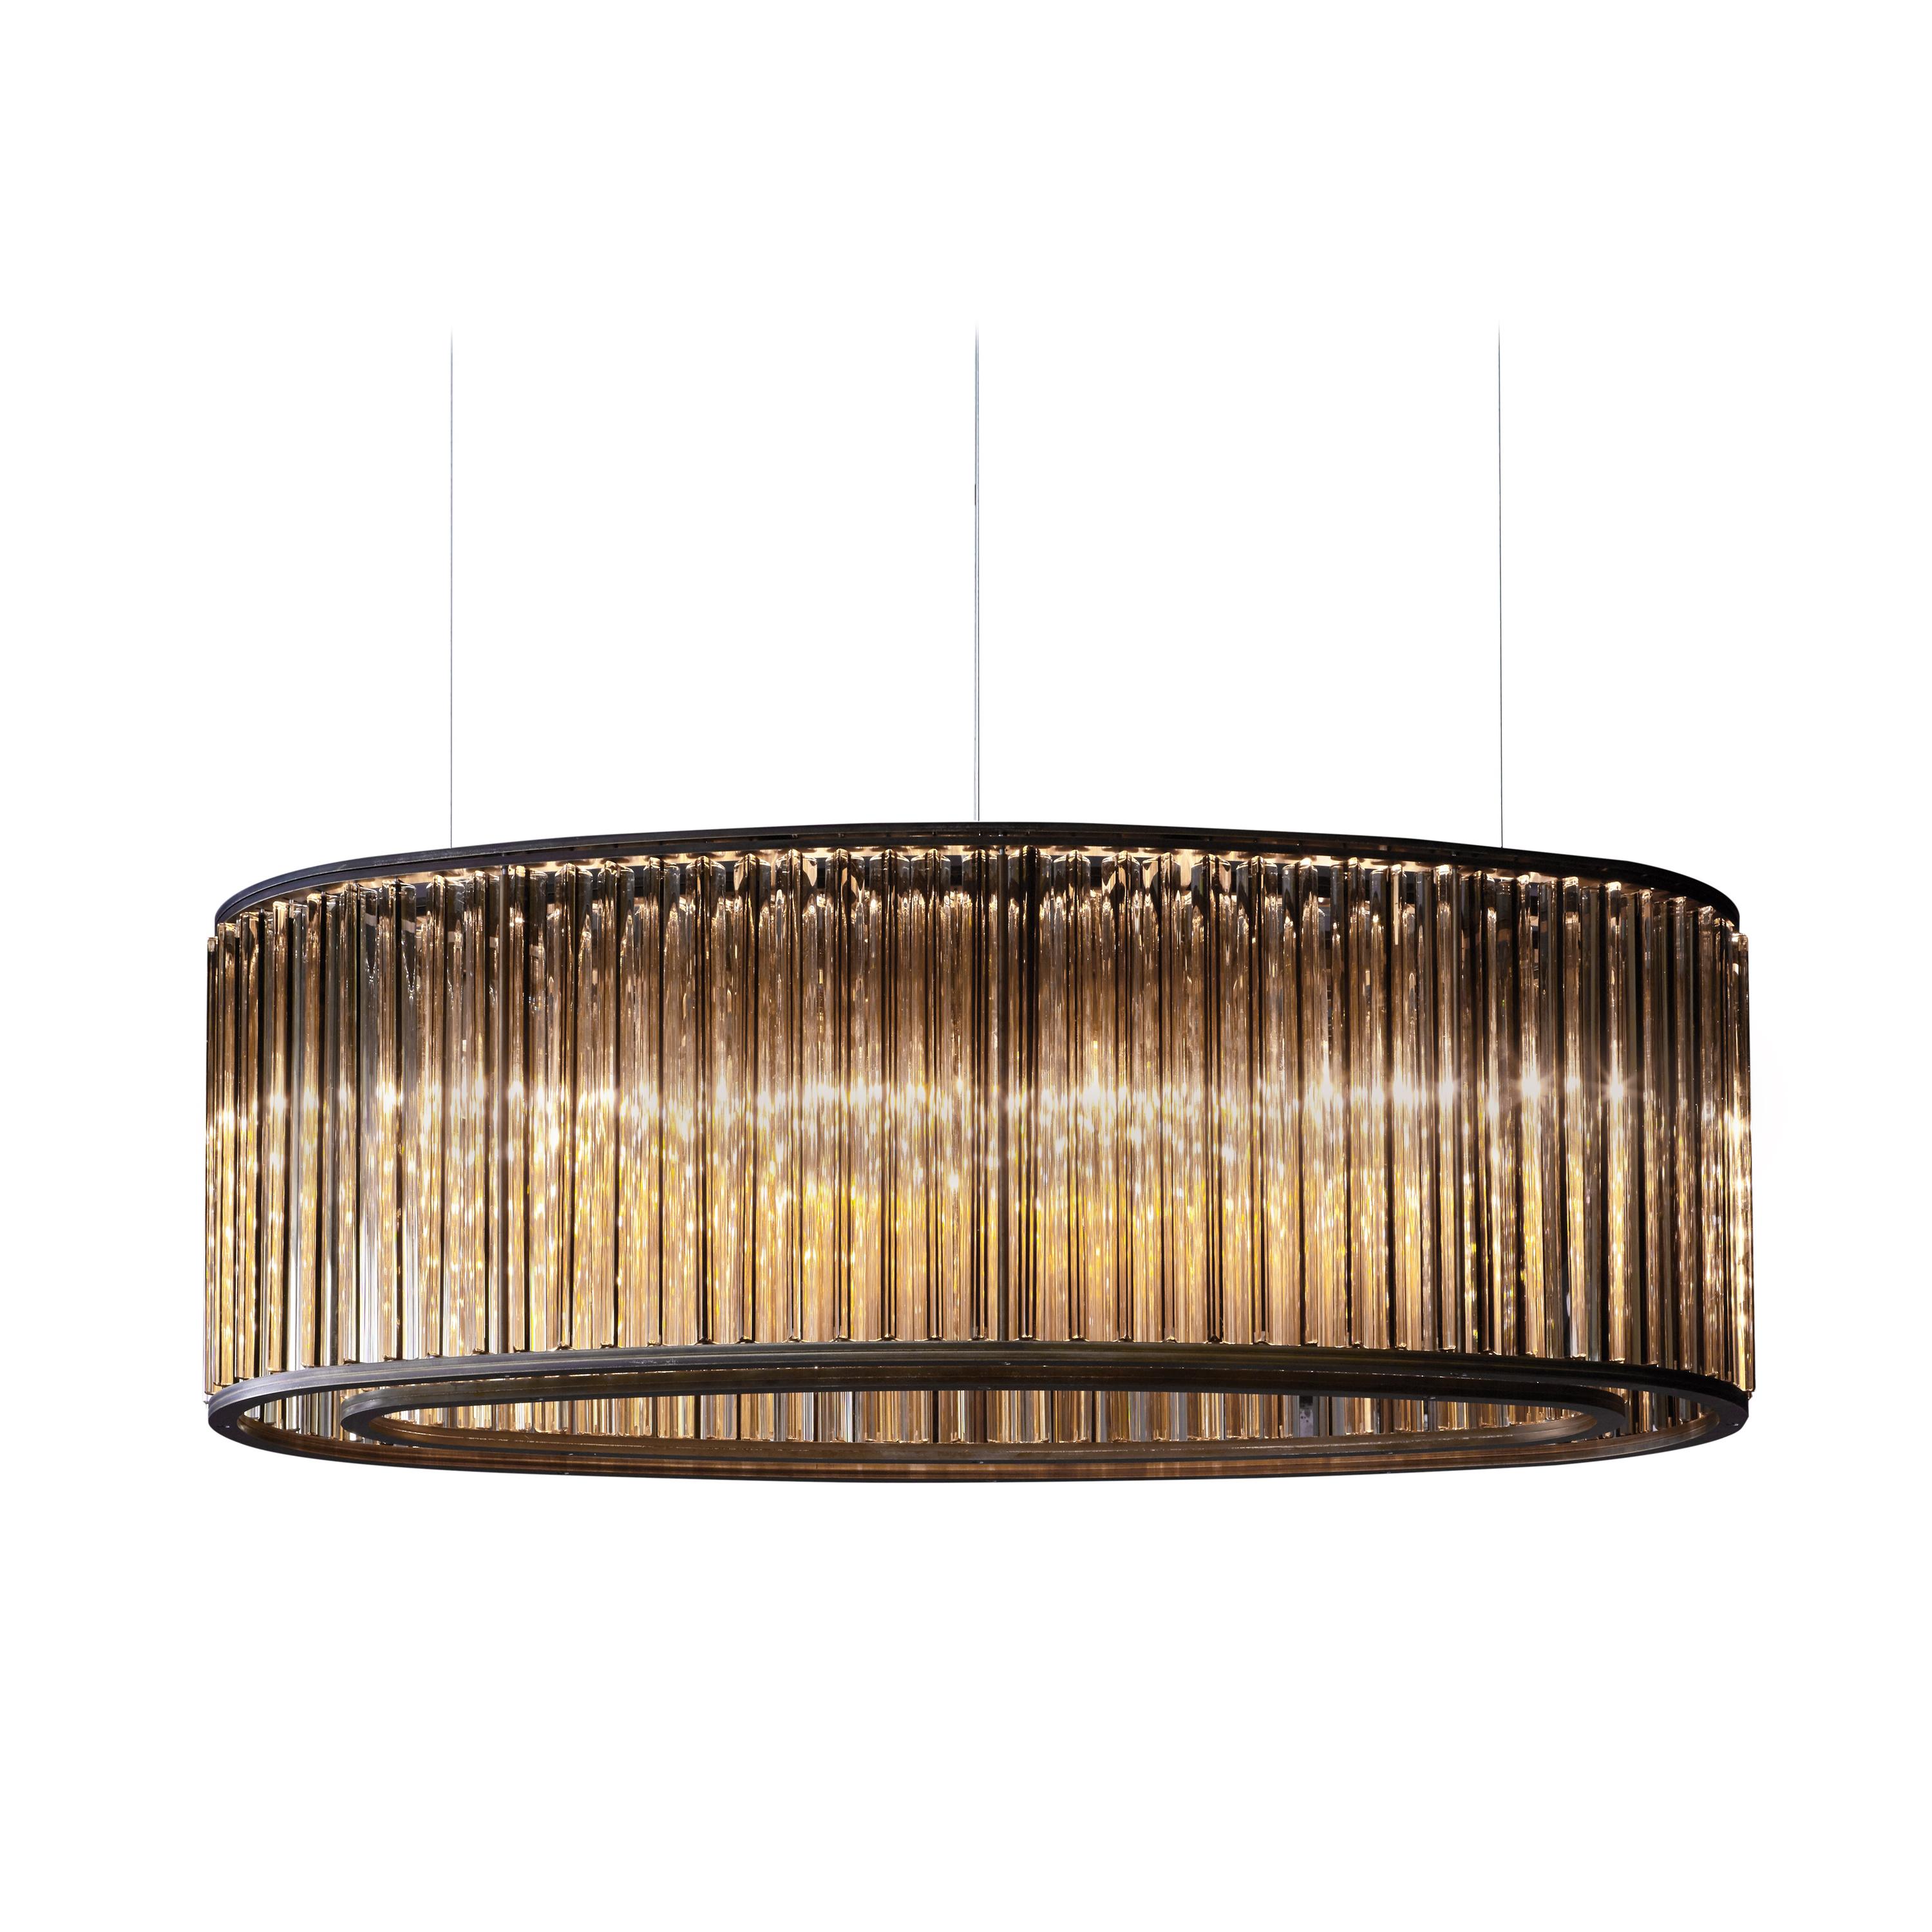 For Sale: Clear (Crystal) VeniceM Crown Elliptical Pendant Light in Matte Black Nickel by Massimo Tonetto